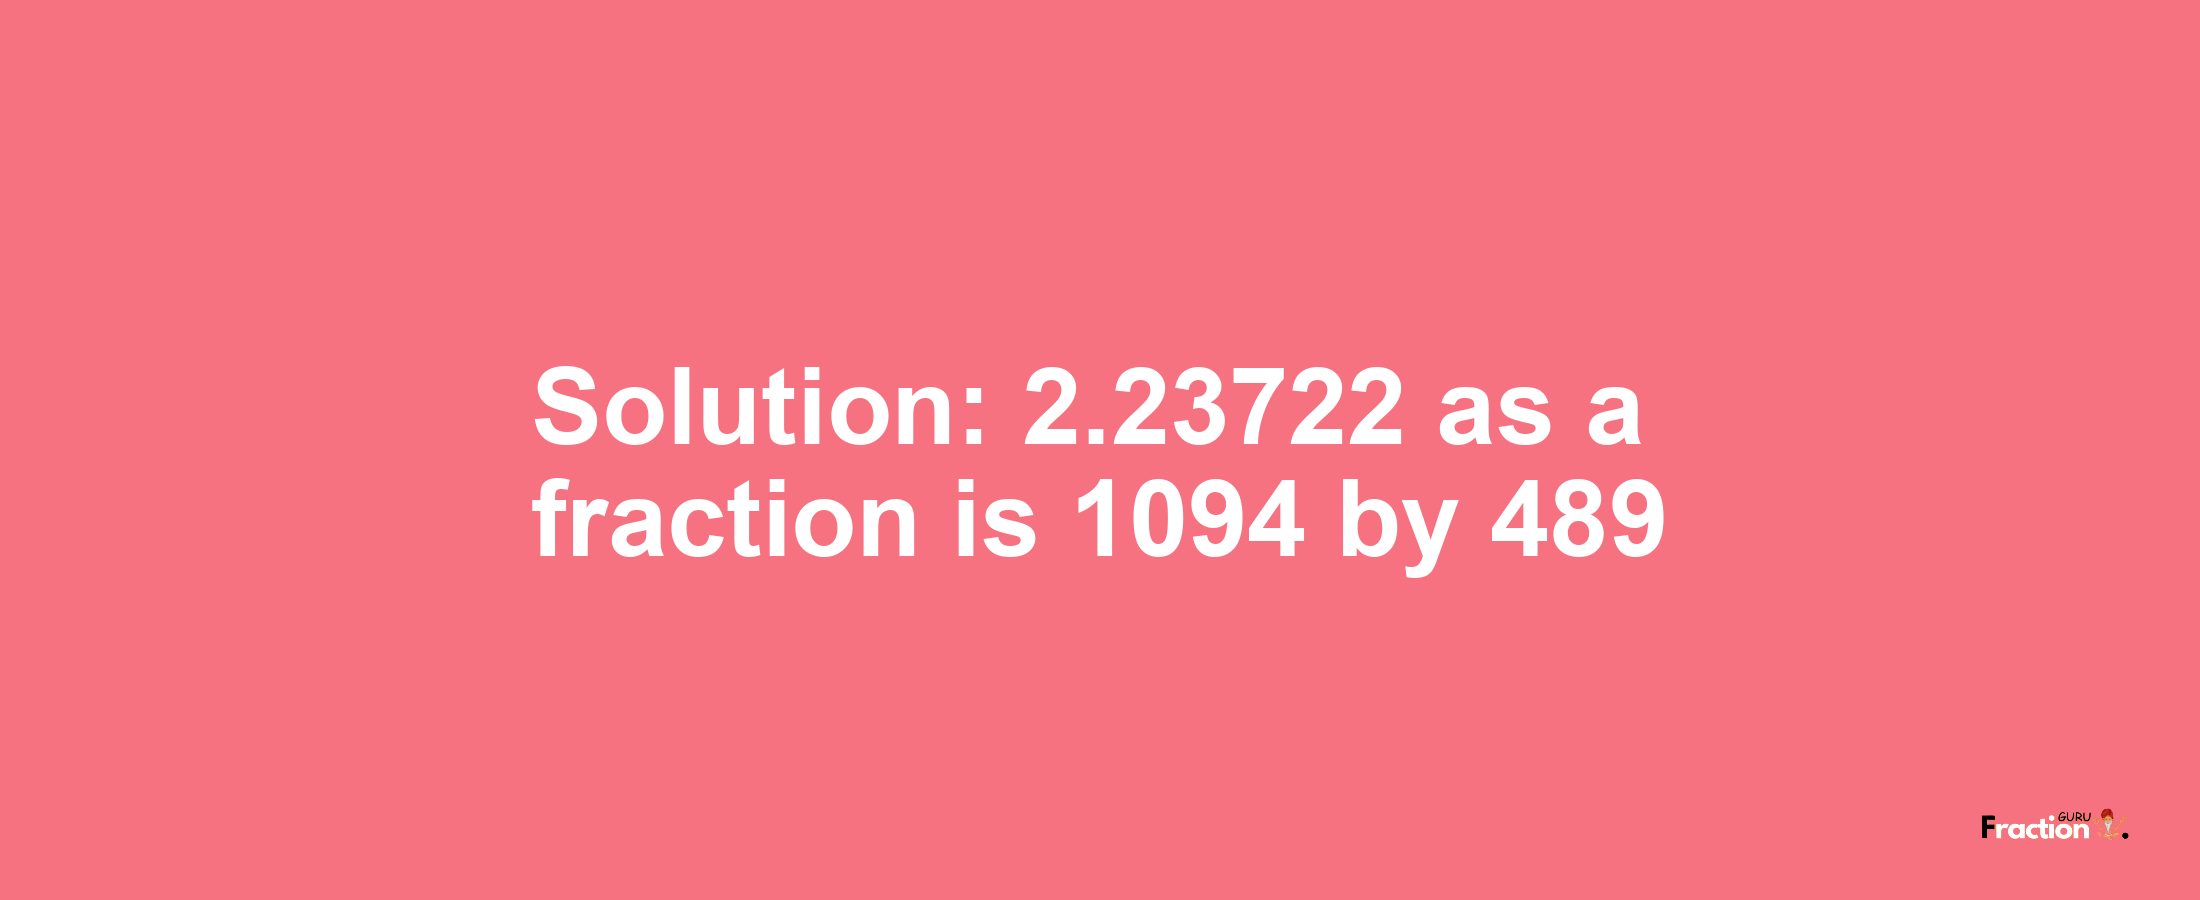 Solution:2.23722 as a fraction is 1094/489